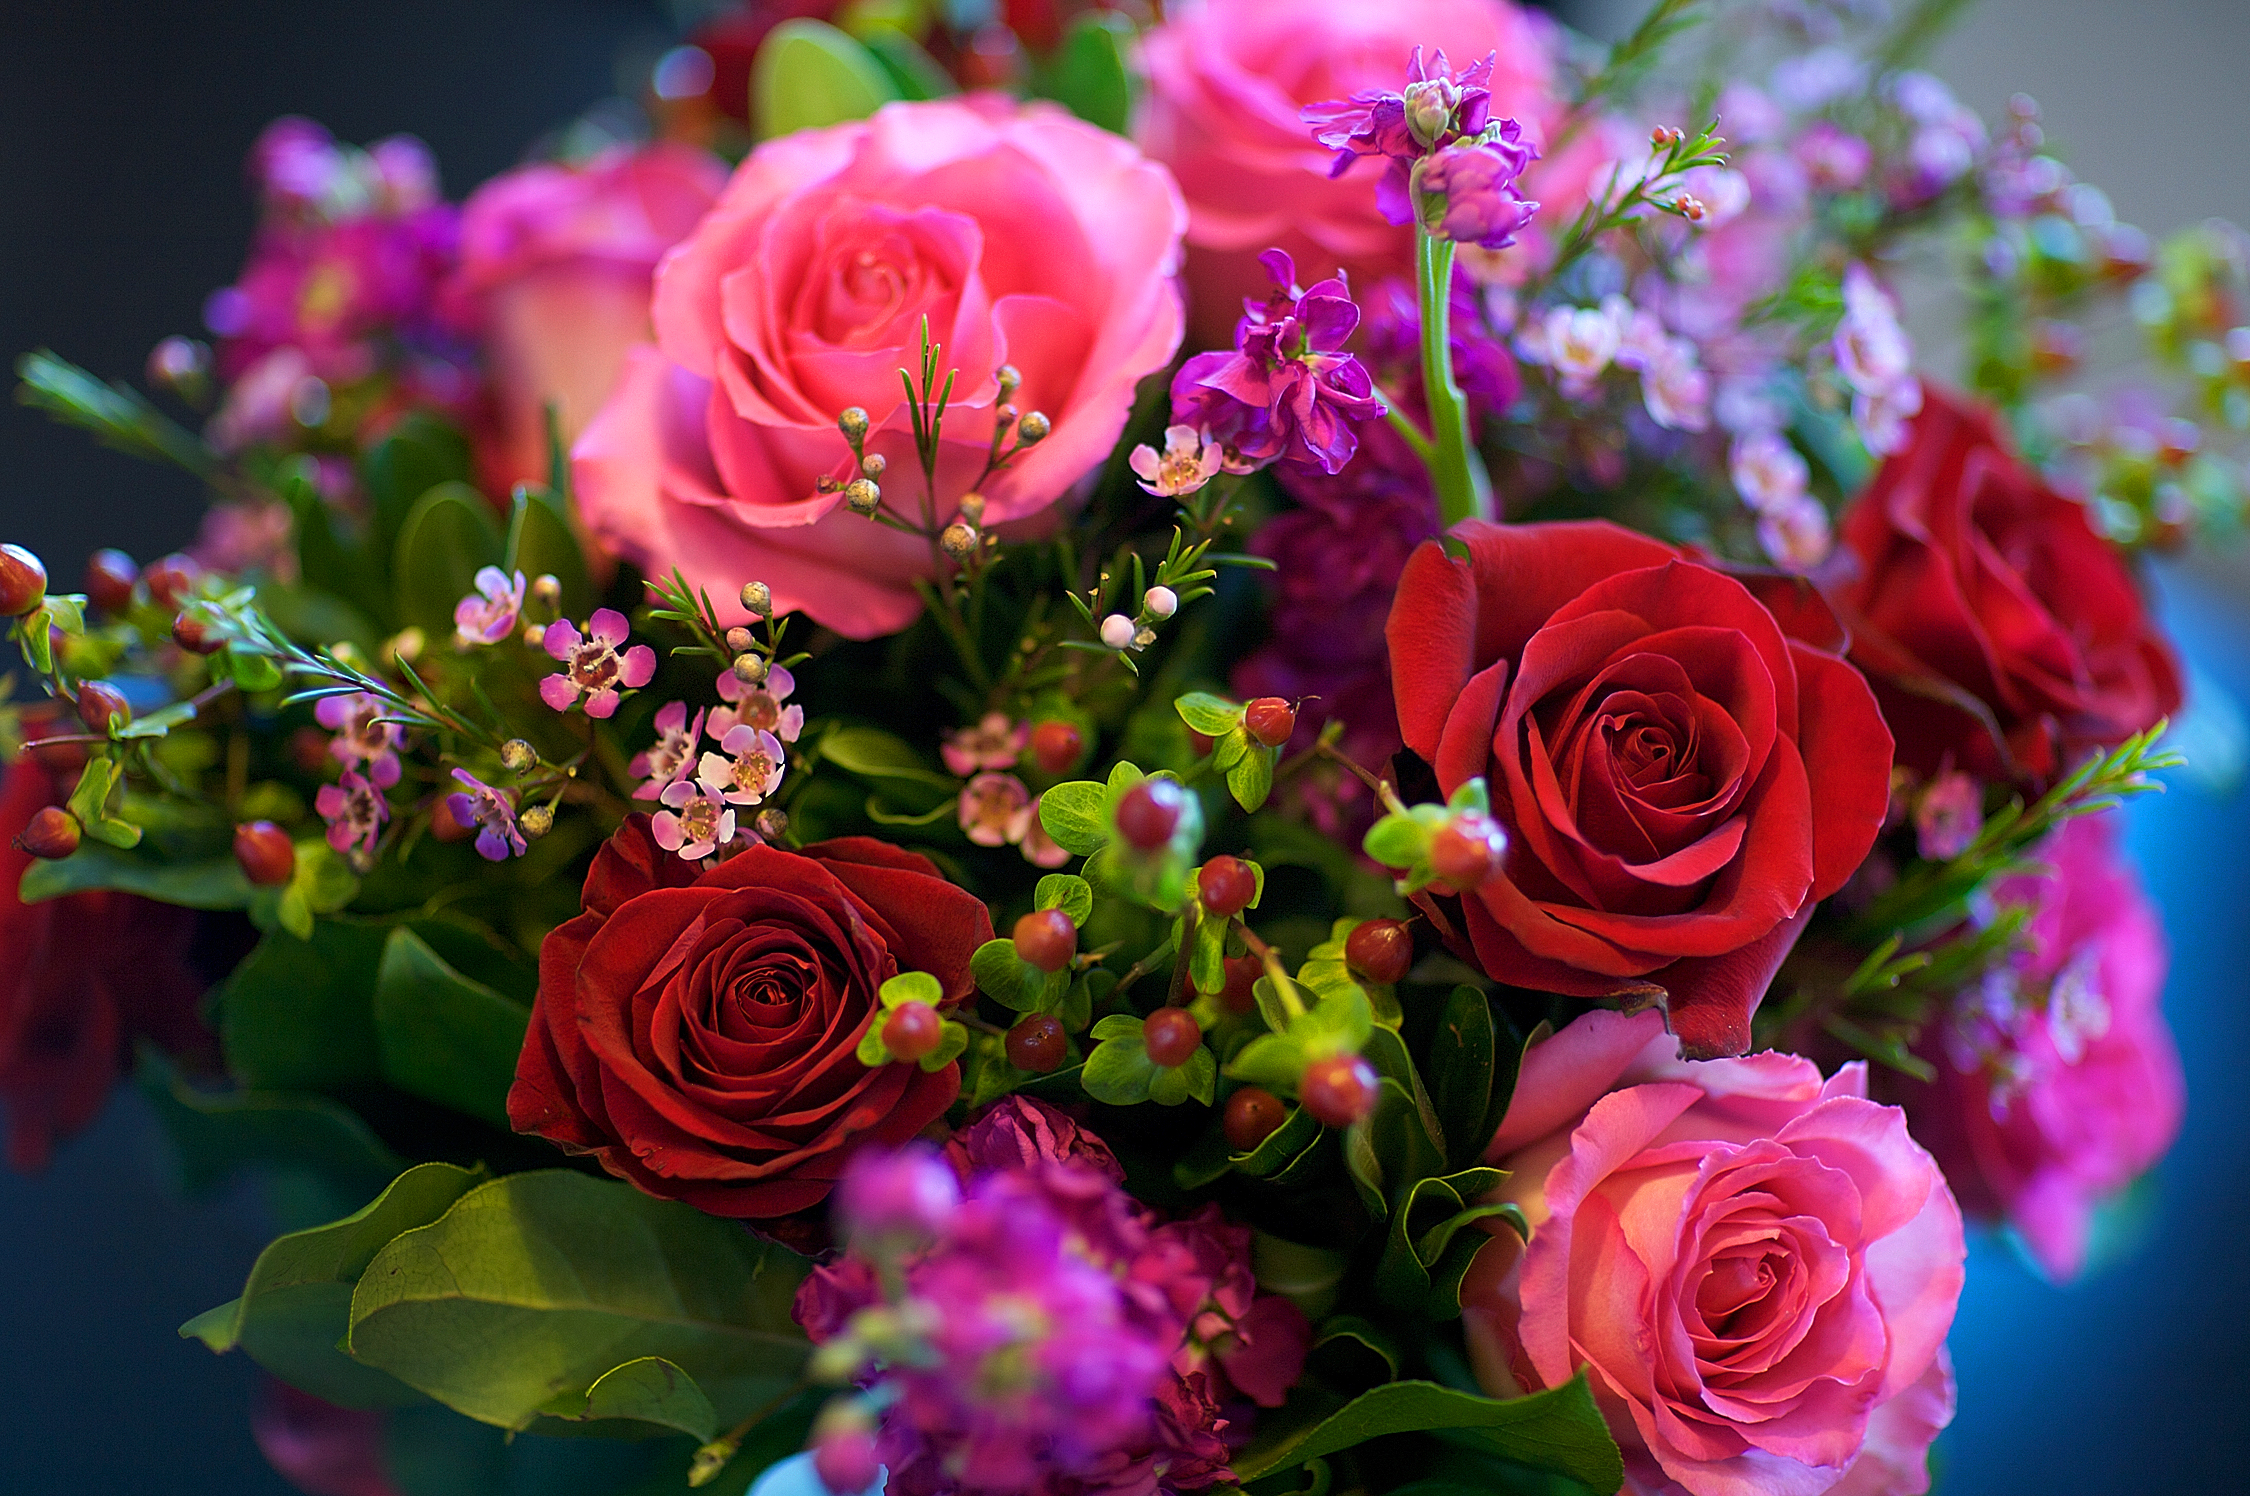 Roses_Bouquets_483657